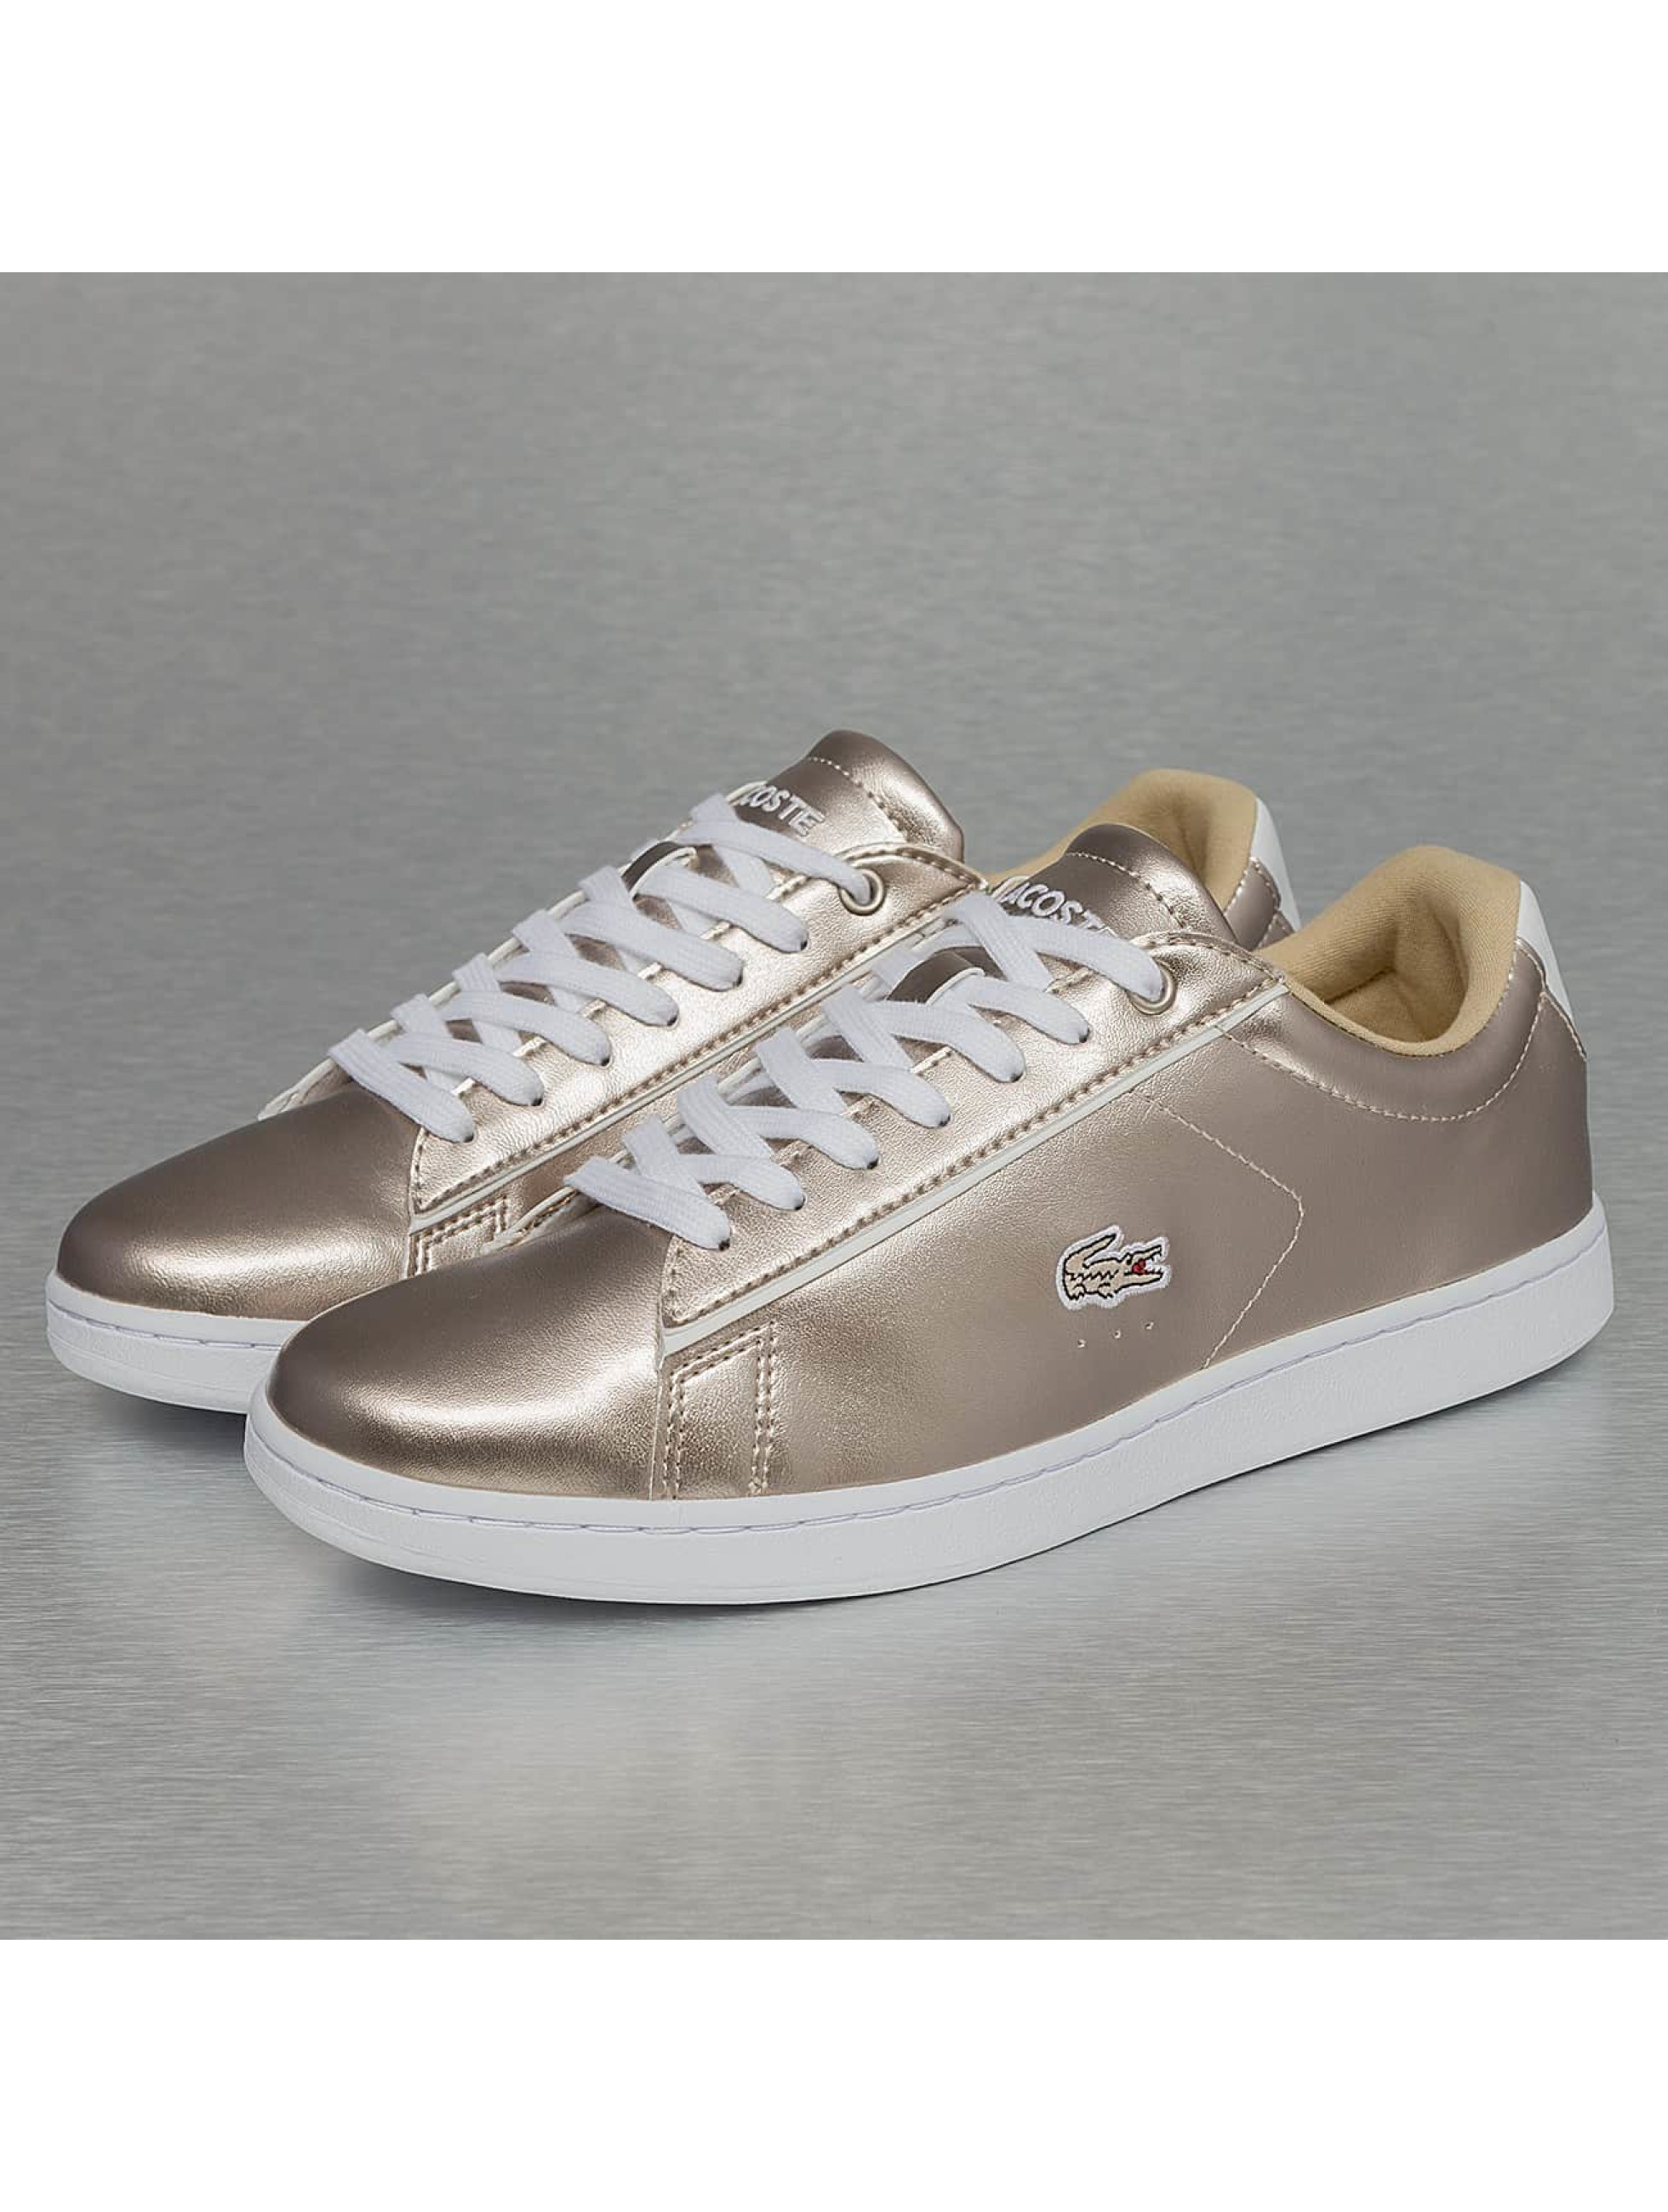 Lacoste Chaussures / Baskets Carnaby EVO 316 SPW en gris